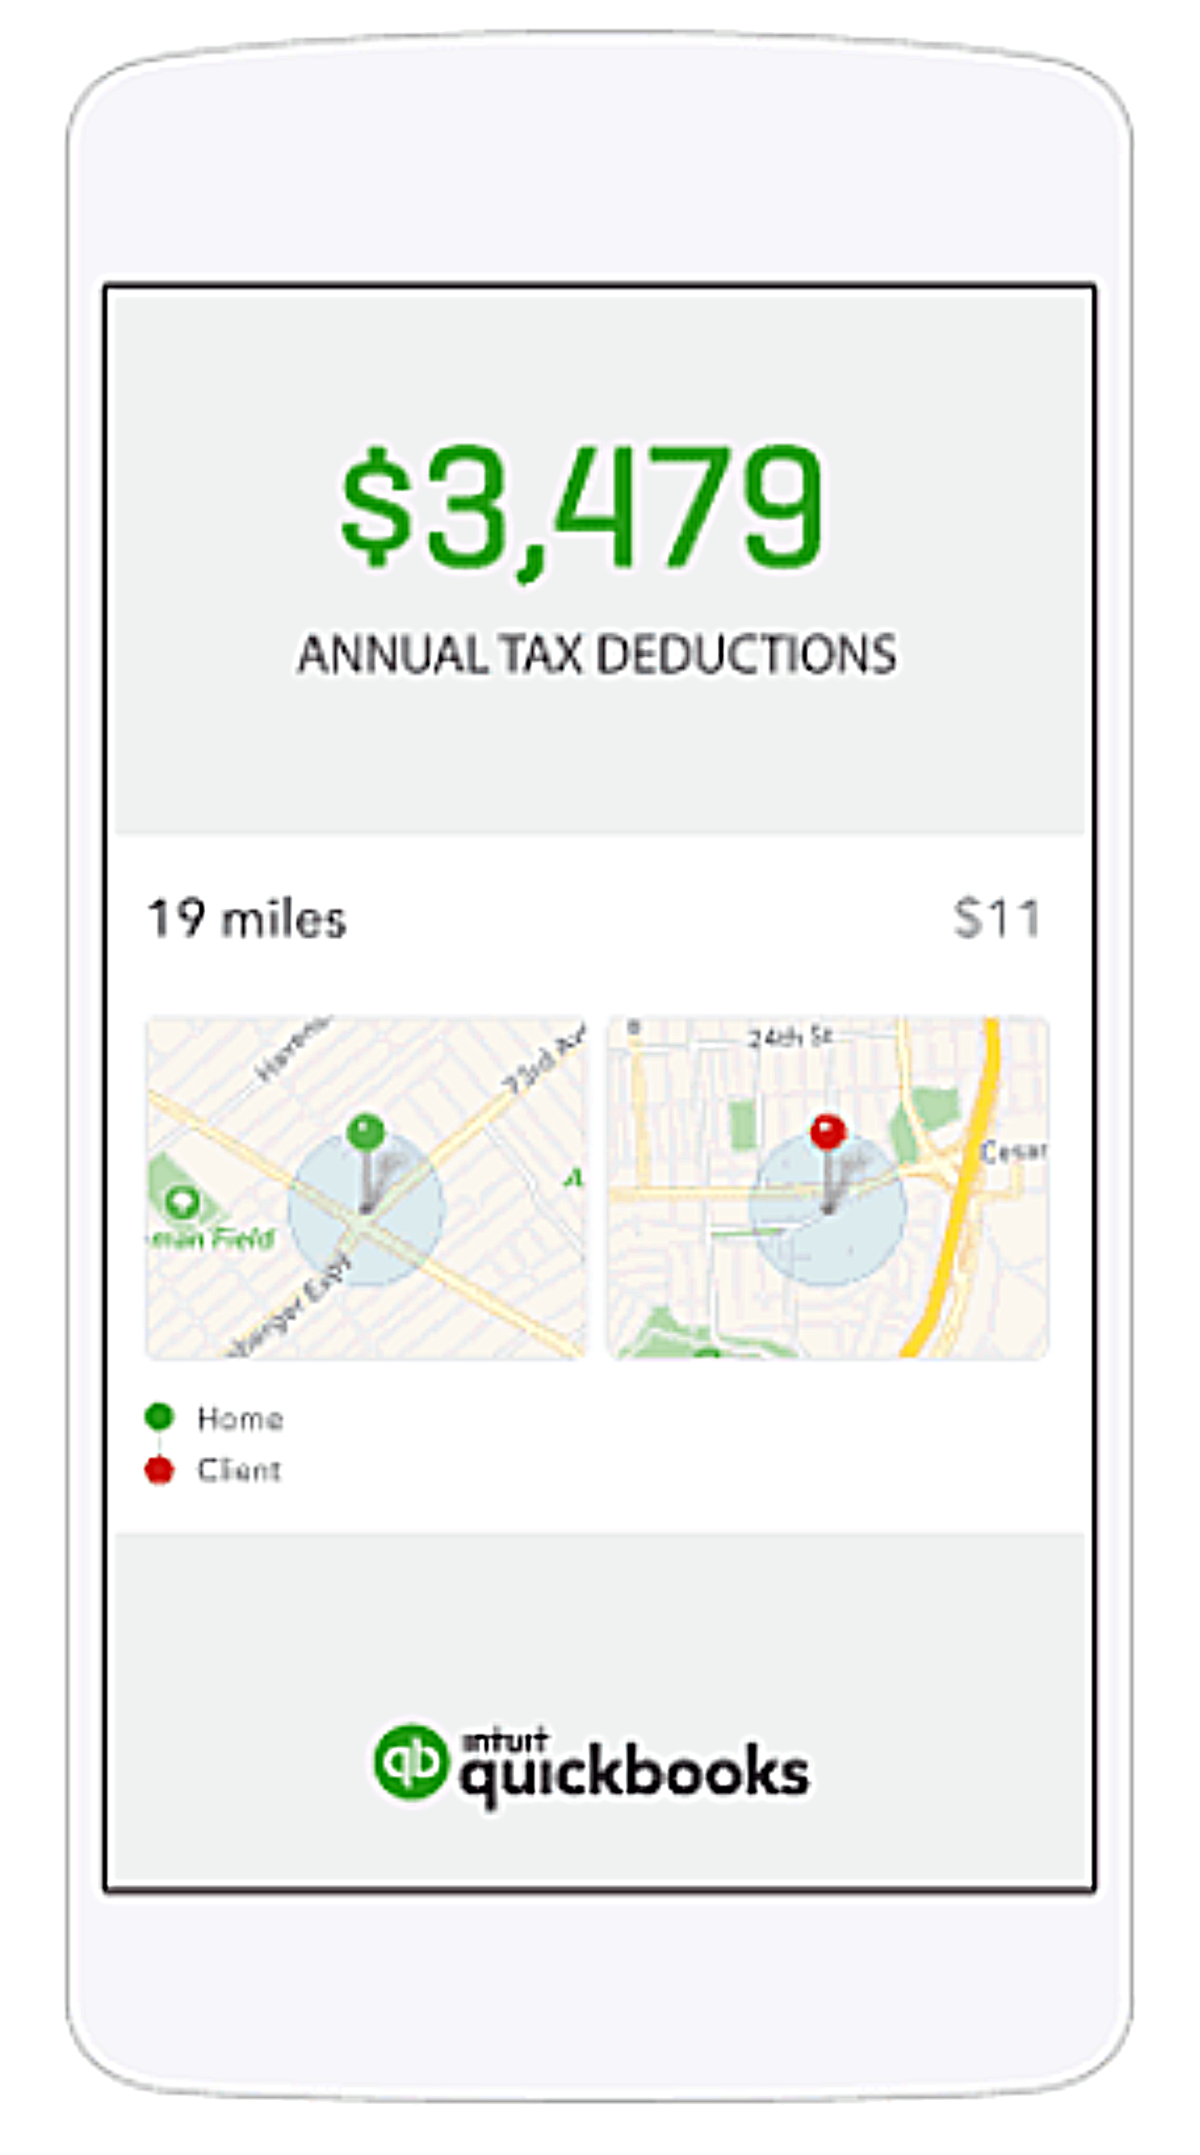 fox-it-concepts-quickbooks-self-employed-milage-tracker-mobil-app